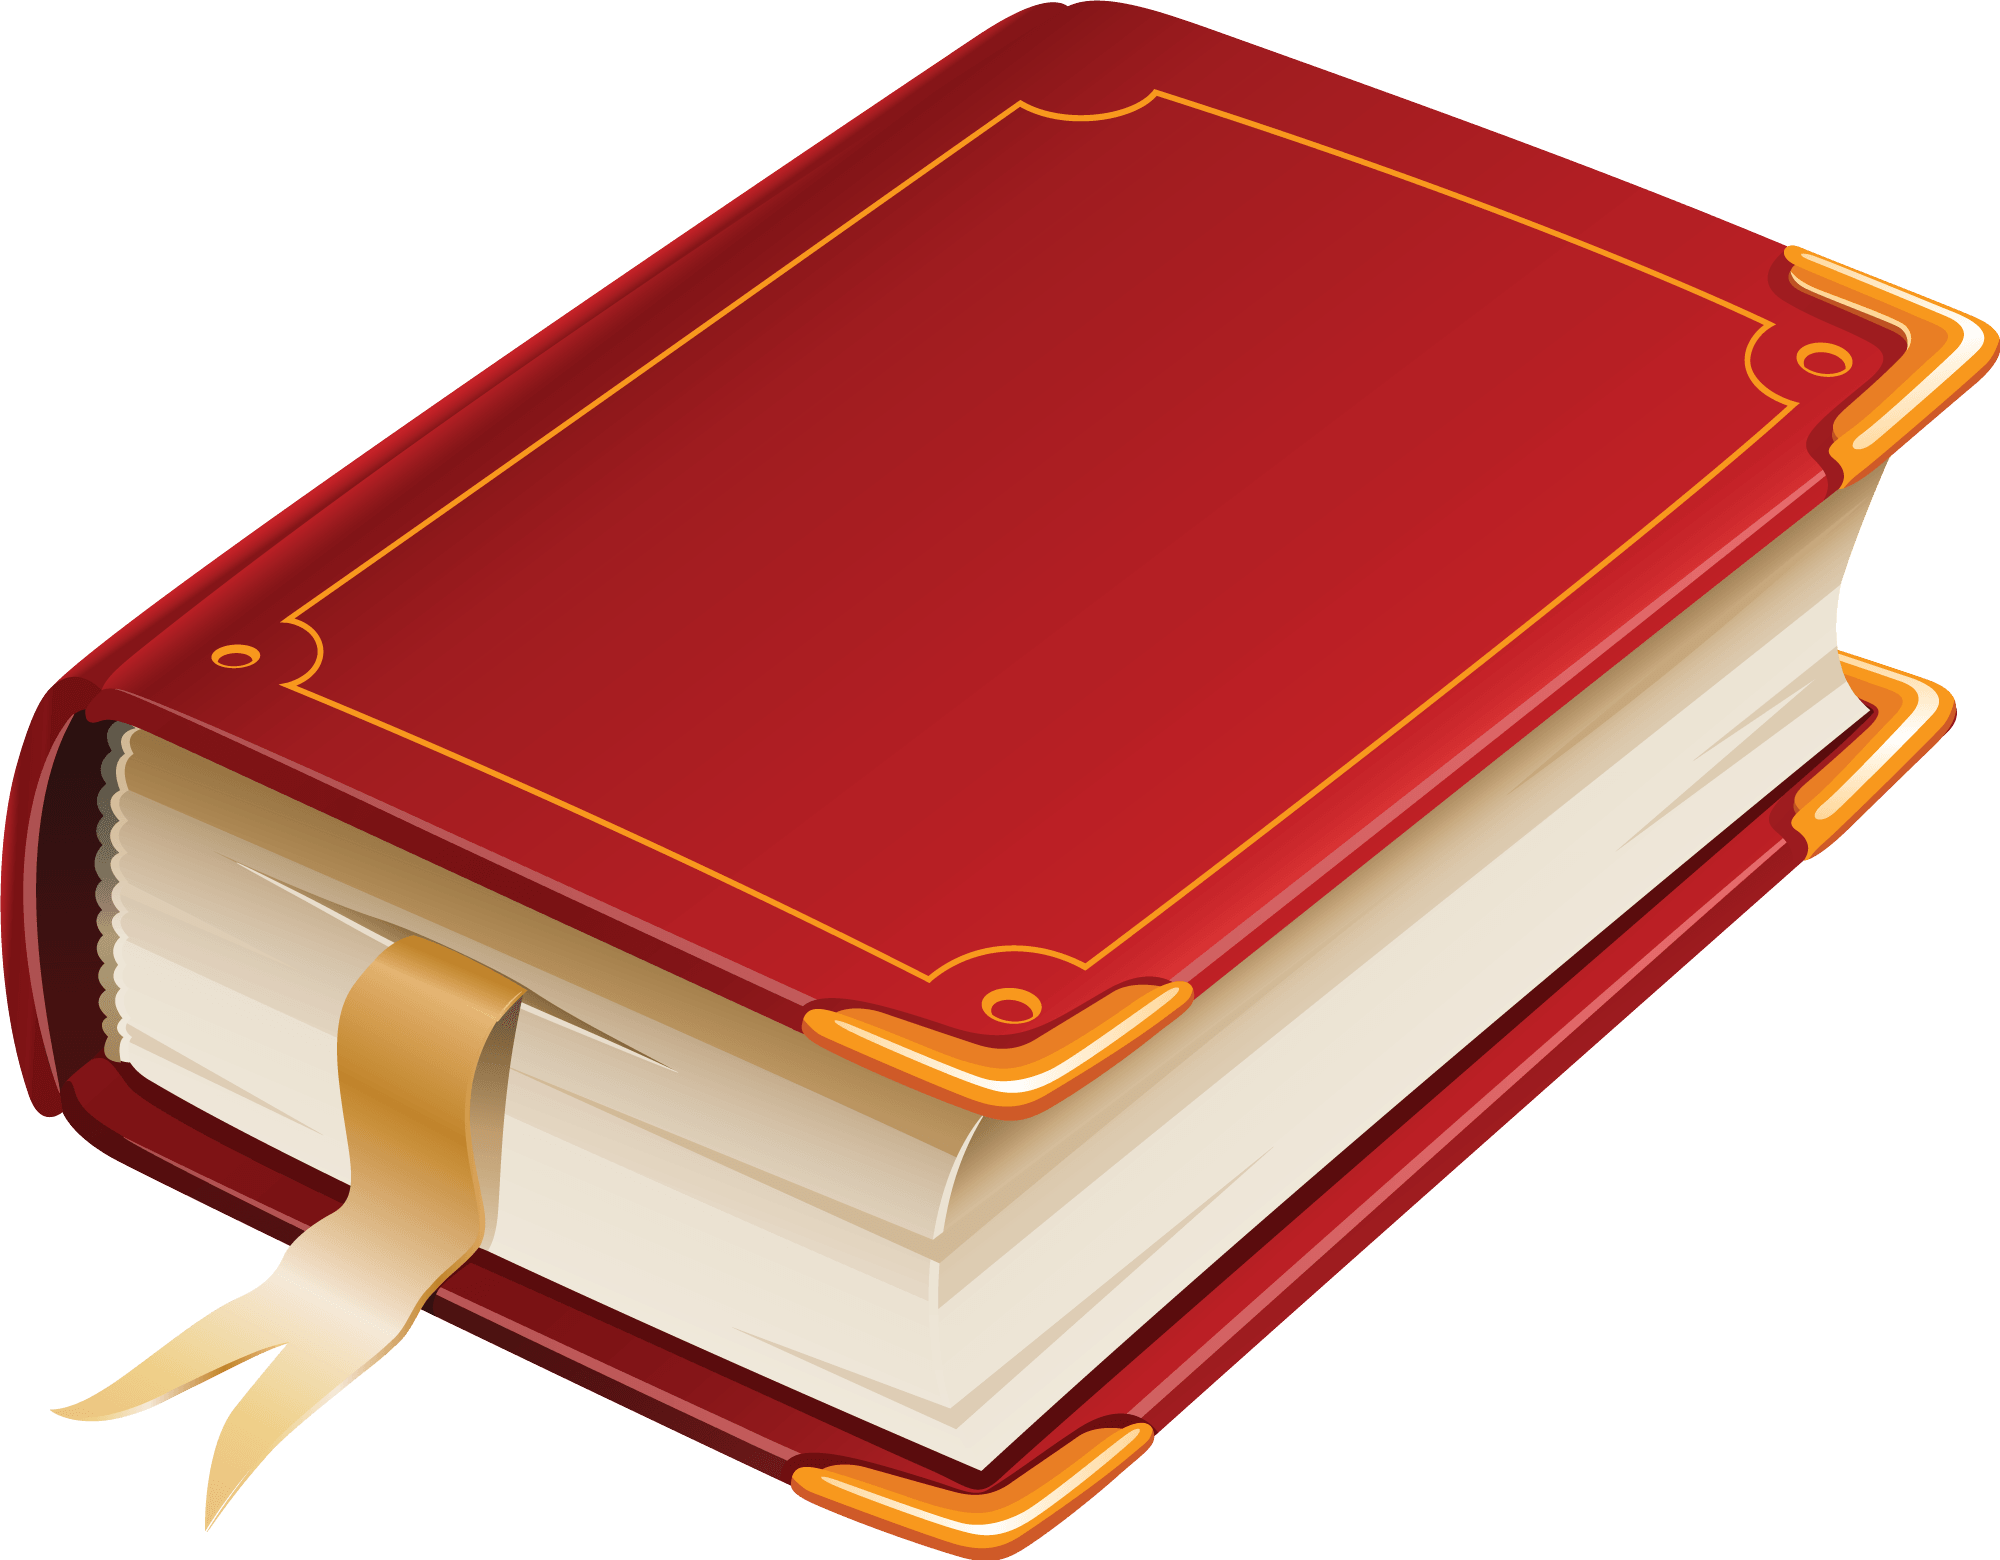 5 red book png image image